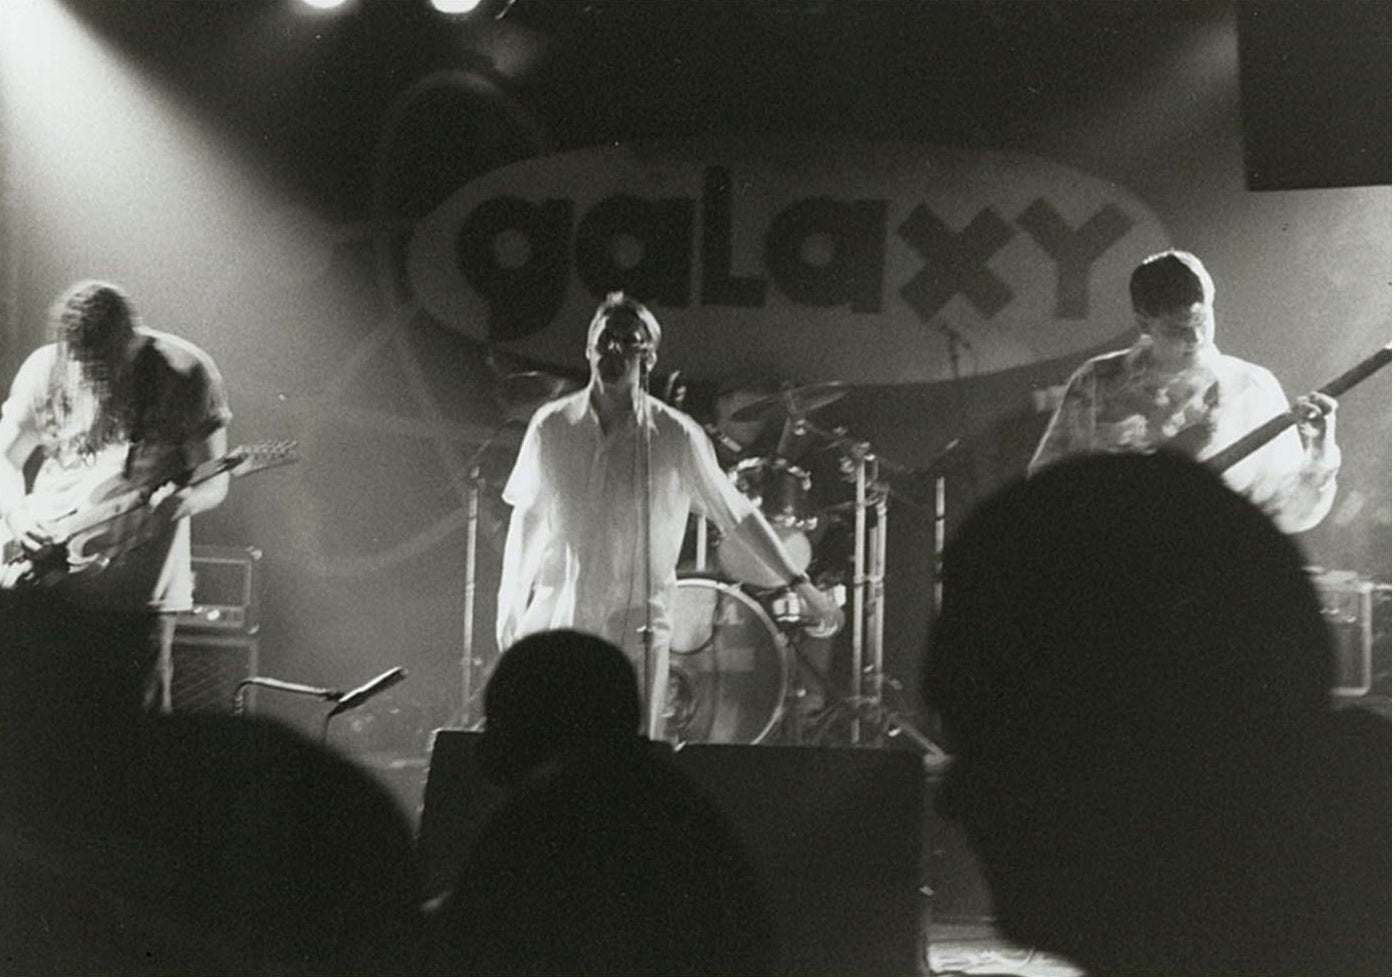 My Little Island band live at the Galaxy club in St. Louis 1997.